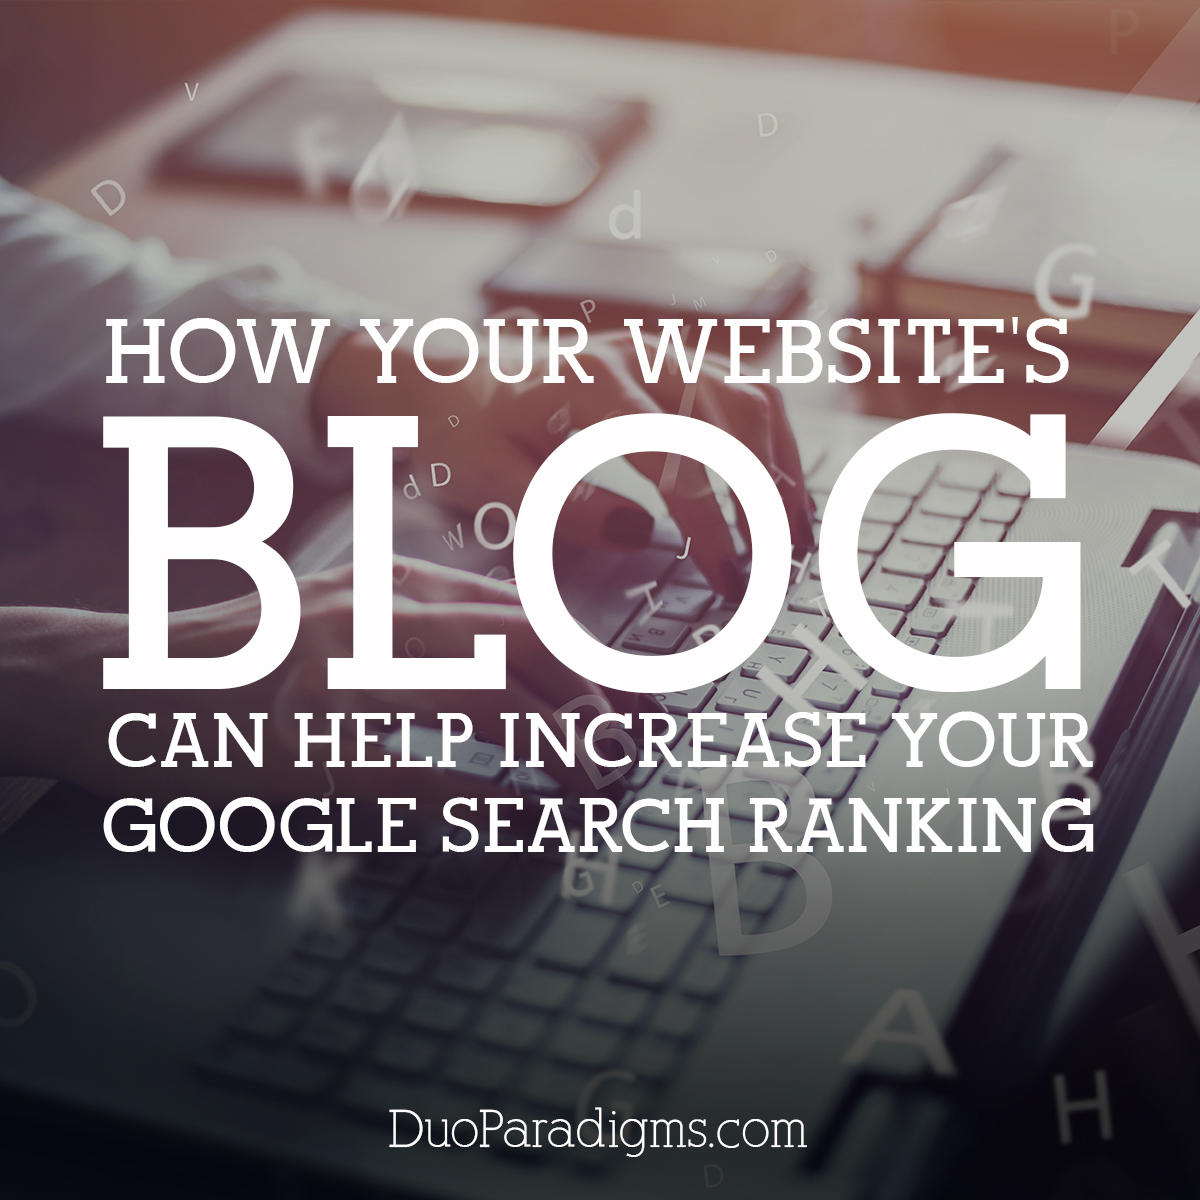 How Your Website's Blog Can Help Increase Your Google Search Ranking